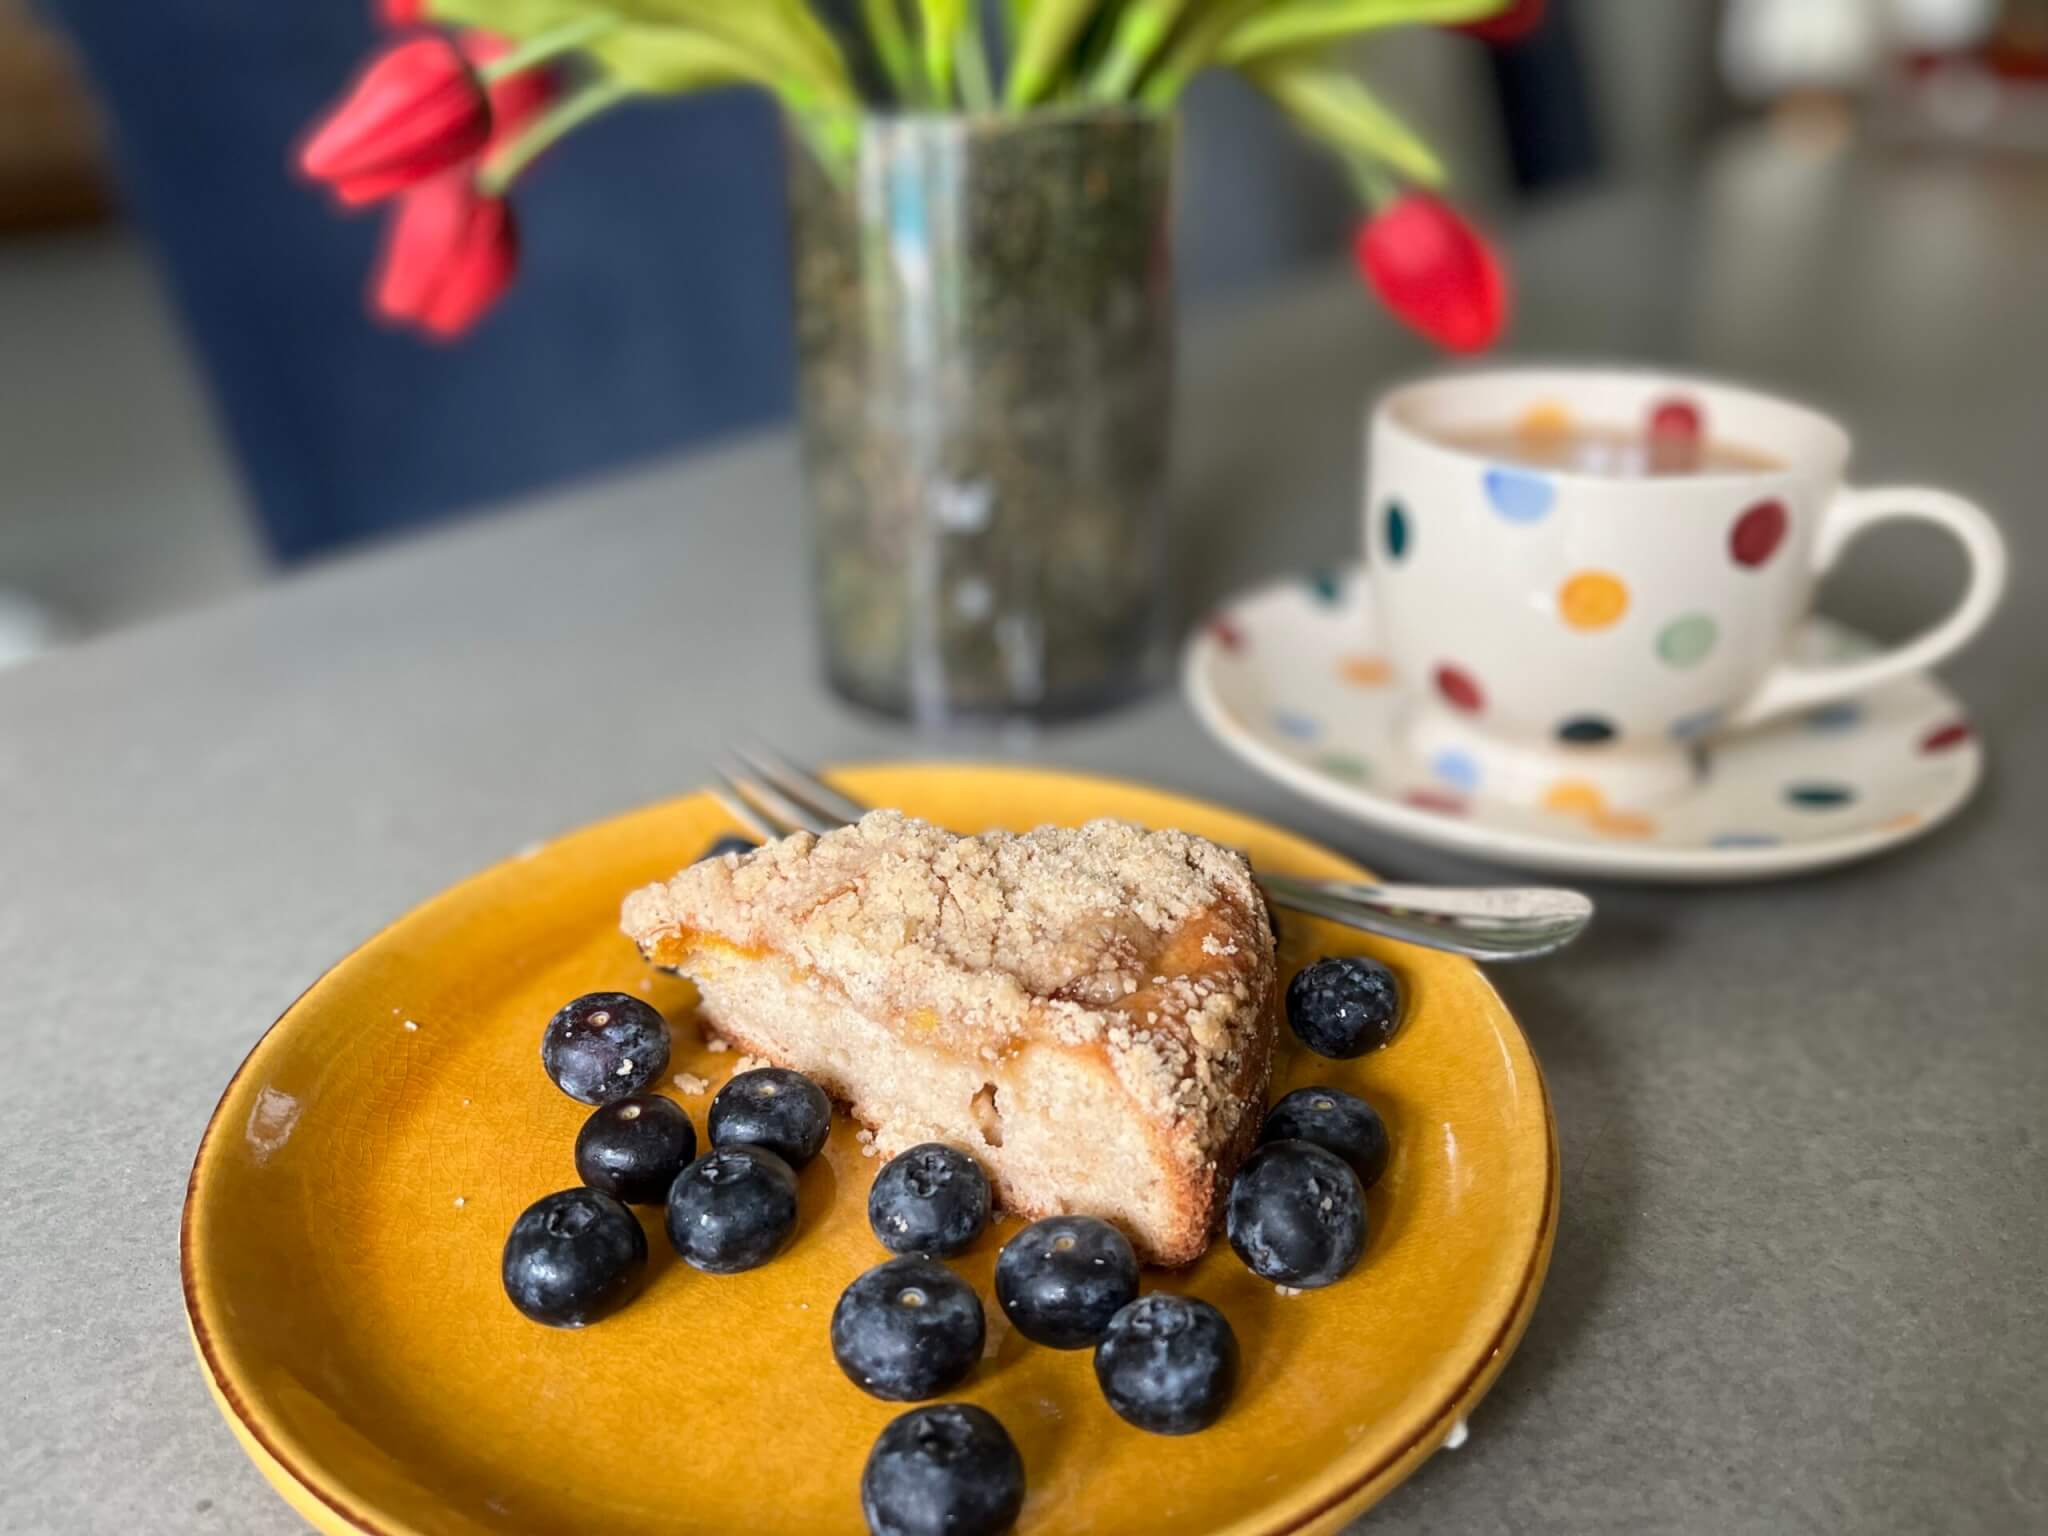 A slice of New Canaan Farms Fredericksburg Peach Jam coffee cake, served with blueberries and a cup of hot tea